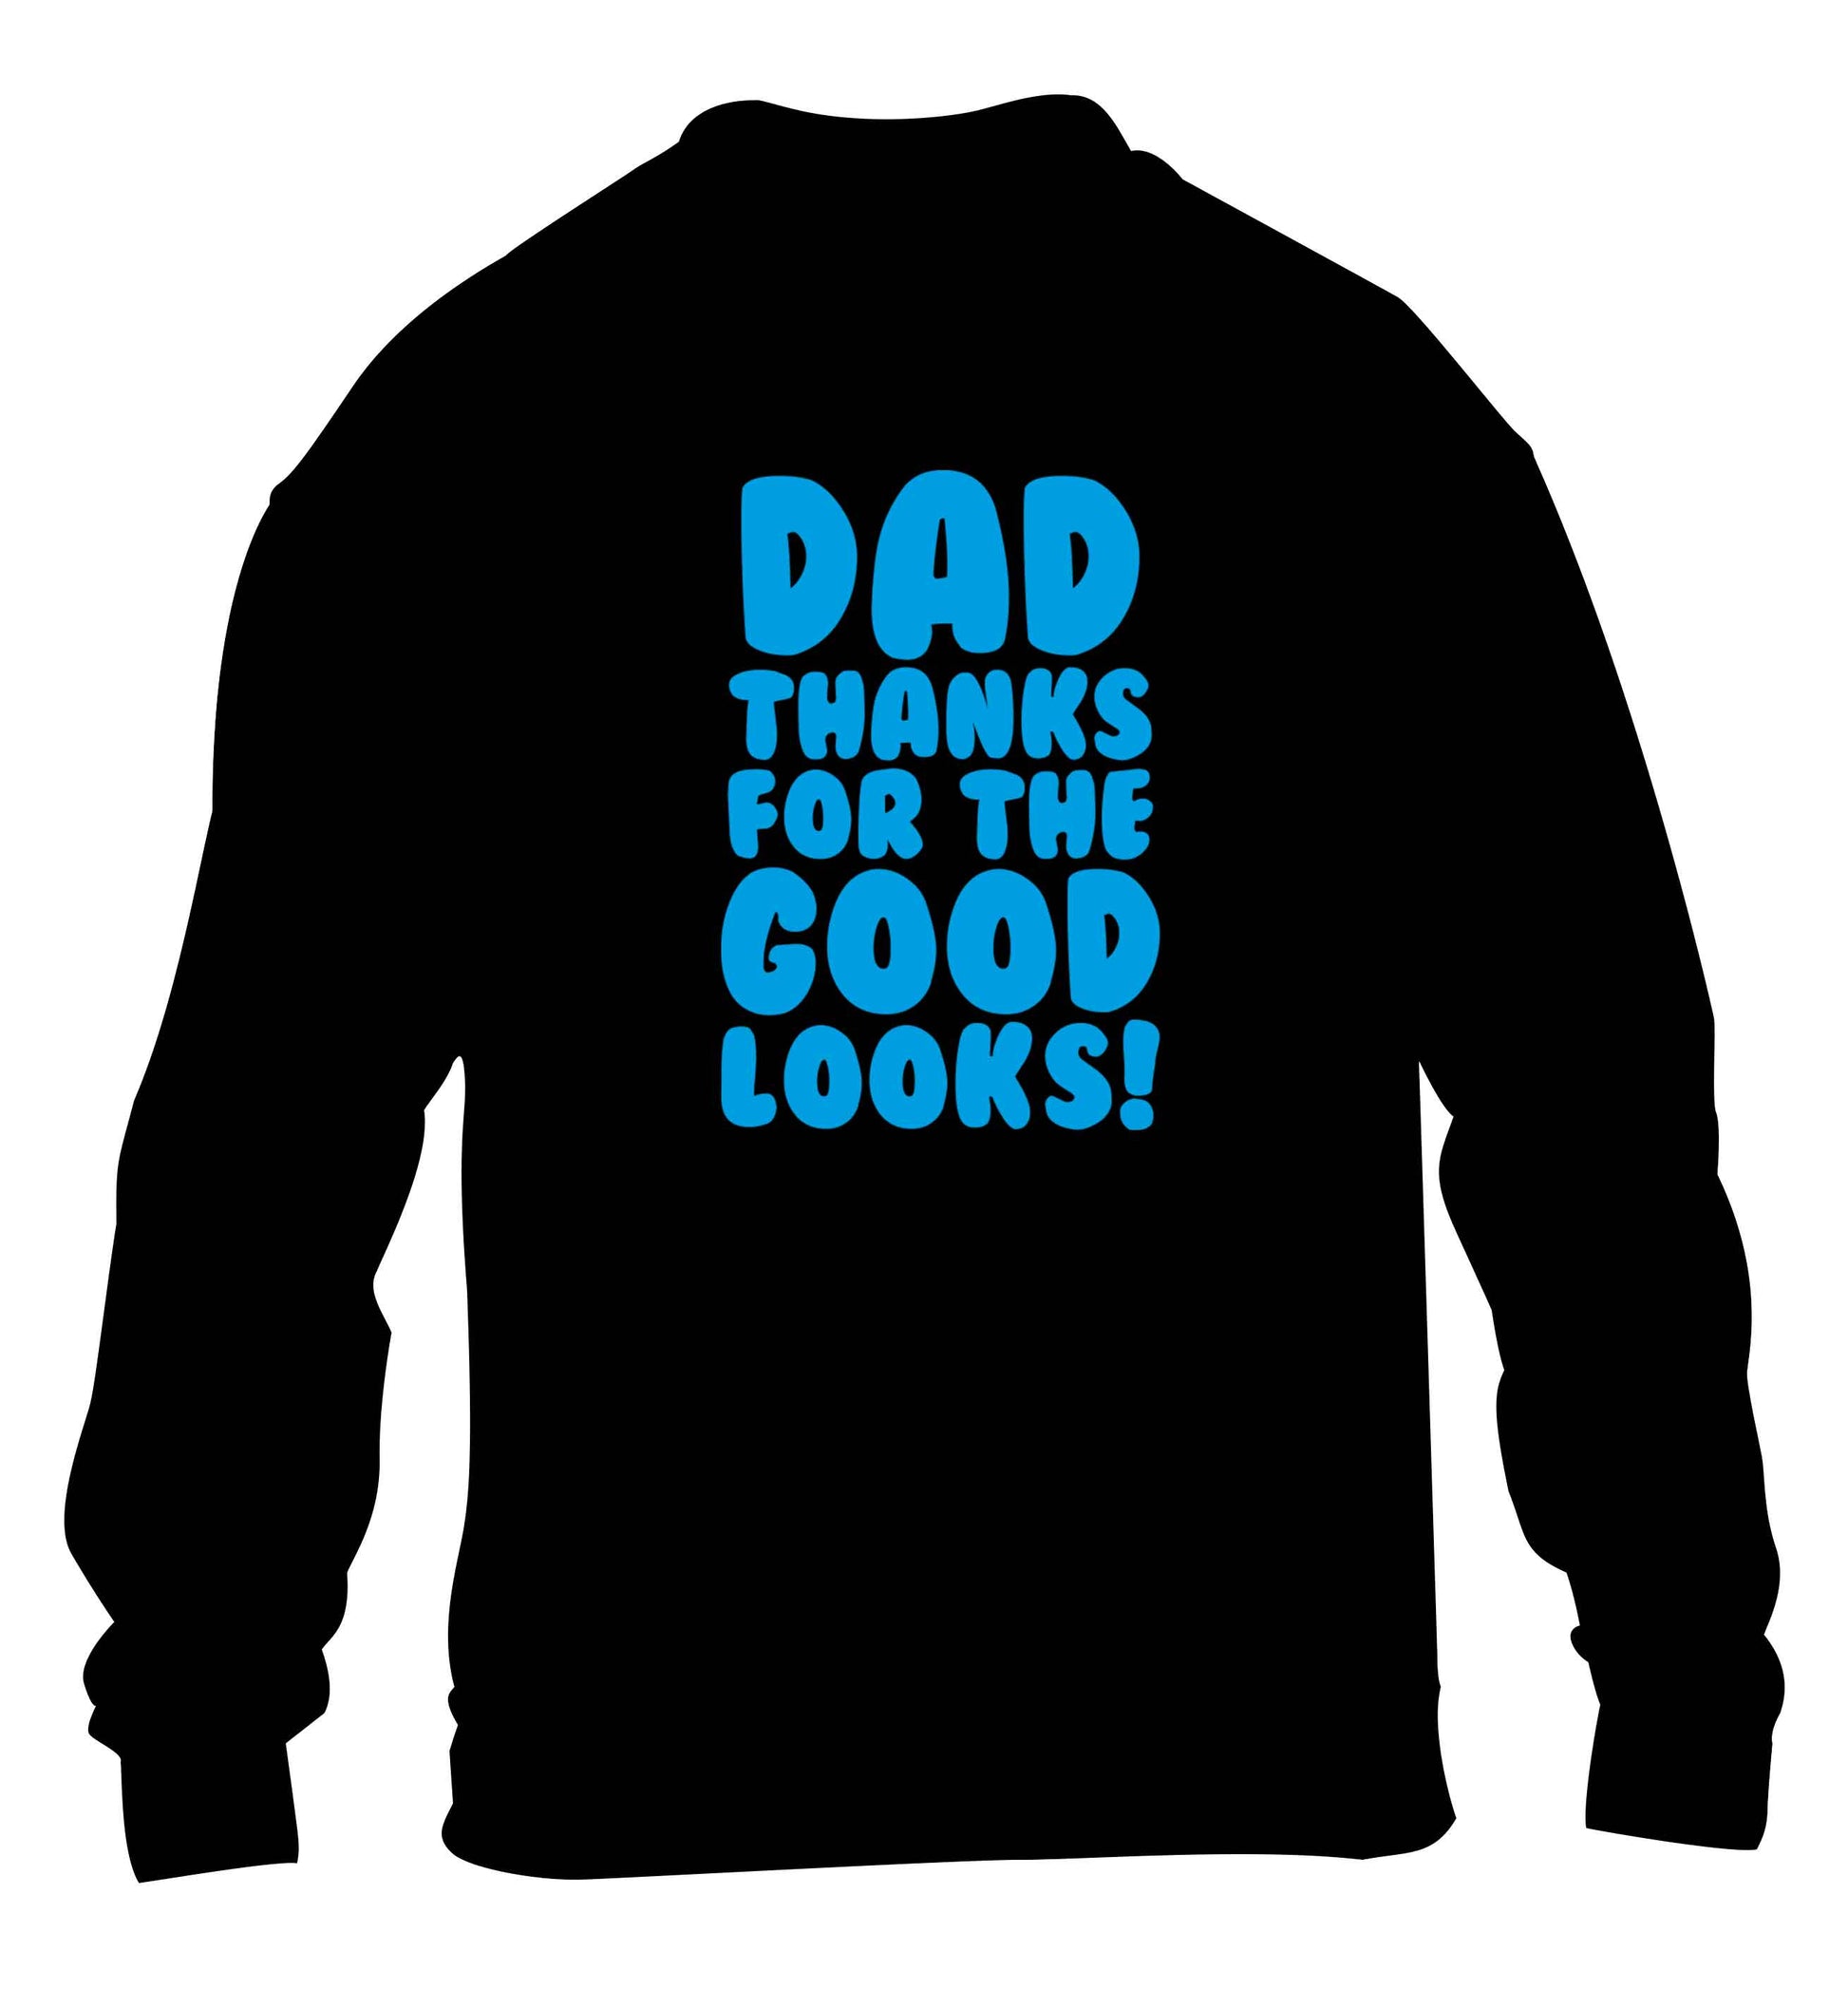 Dad thanks for the good looks children's black sweater 12-13 Years